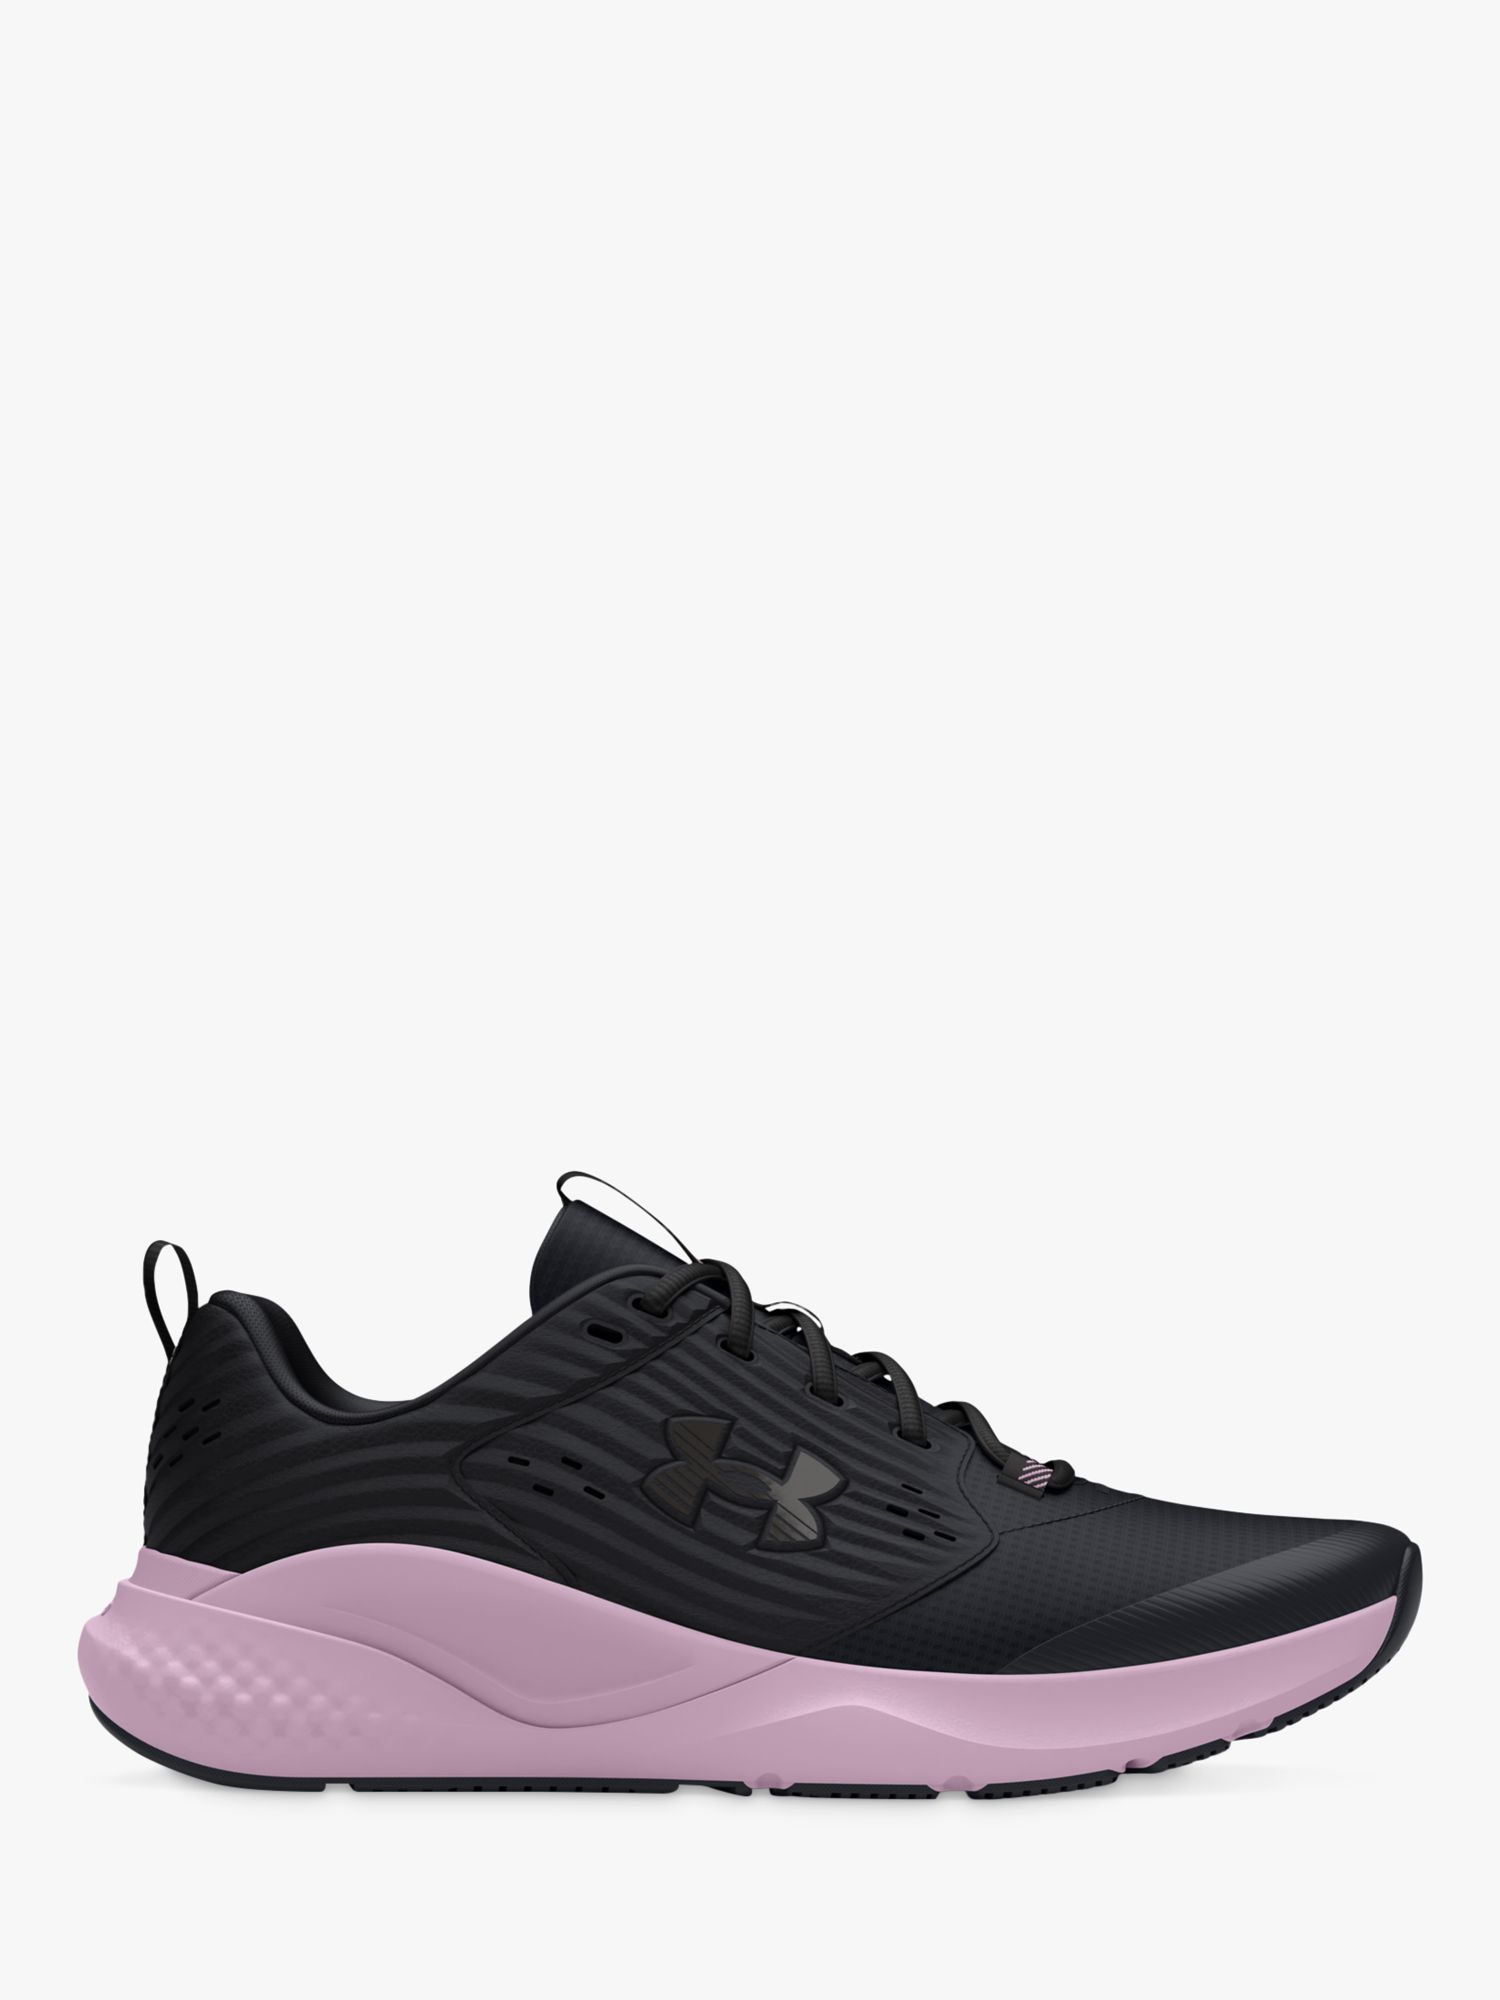 Under Armour Charged Women's Sports Shoes, Black/Purple, 5